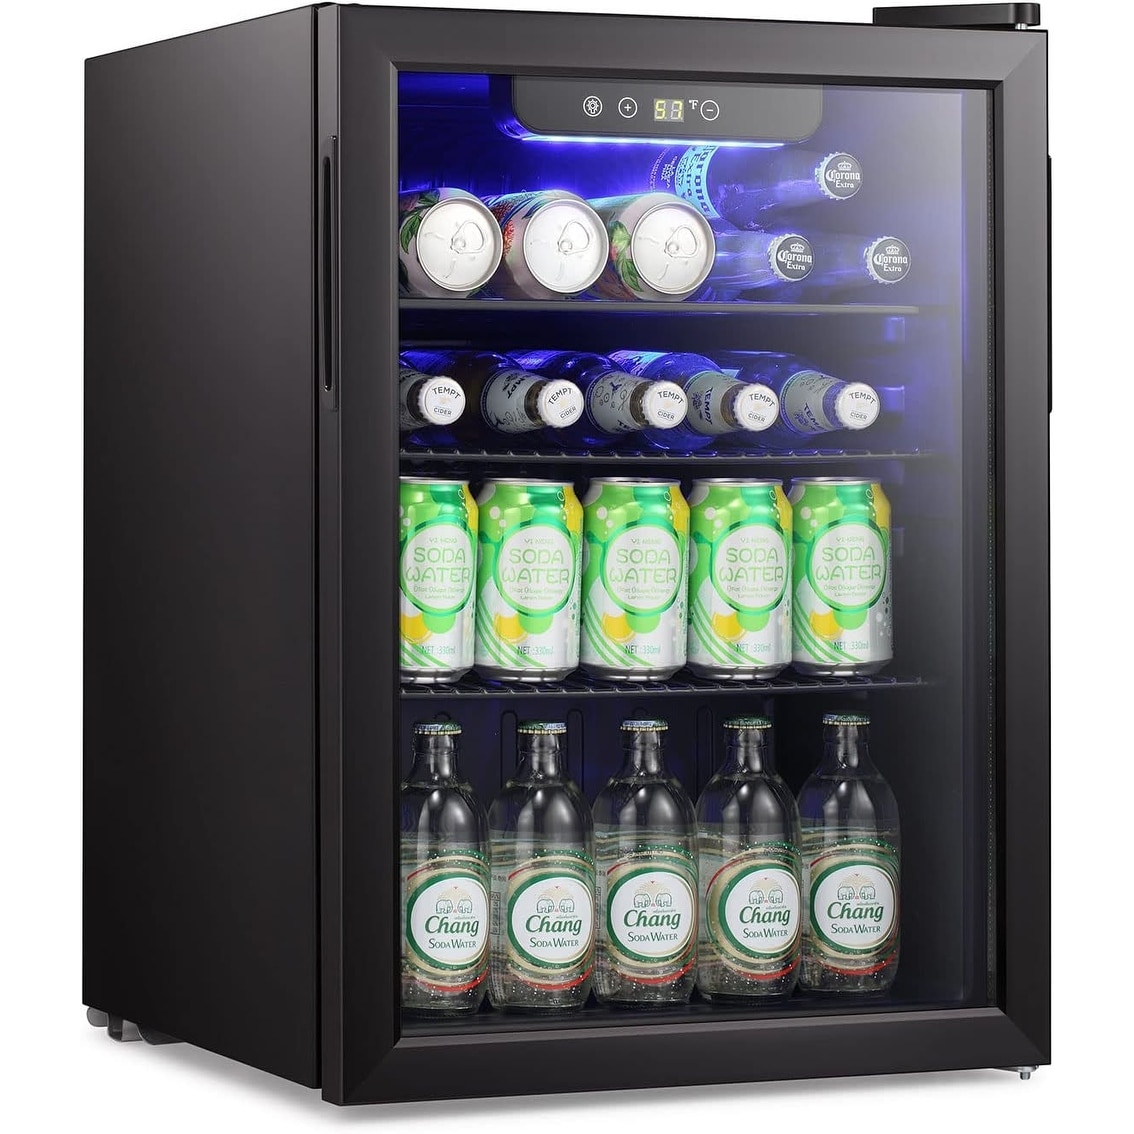 R.W.Flame Mini Fridge-100 Can Beverage Refrigerator Wine Cooler Clear Front Glass Door Small Drink Touch Screen - 2.6 Cu. Ft.